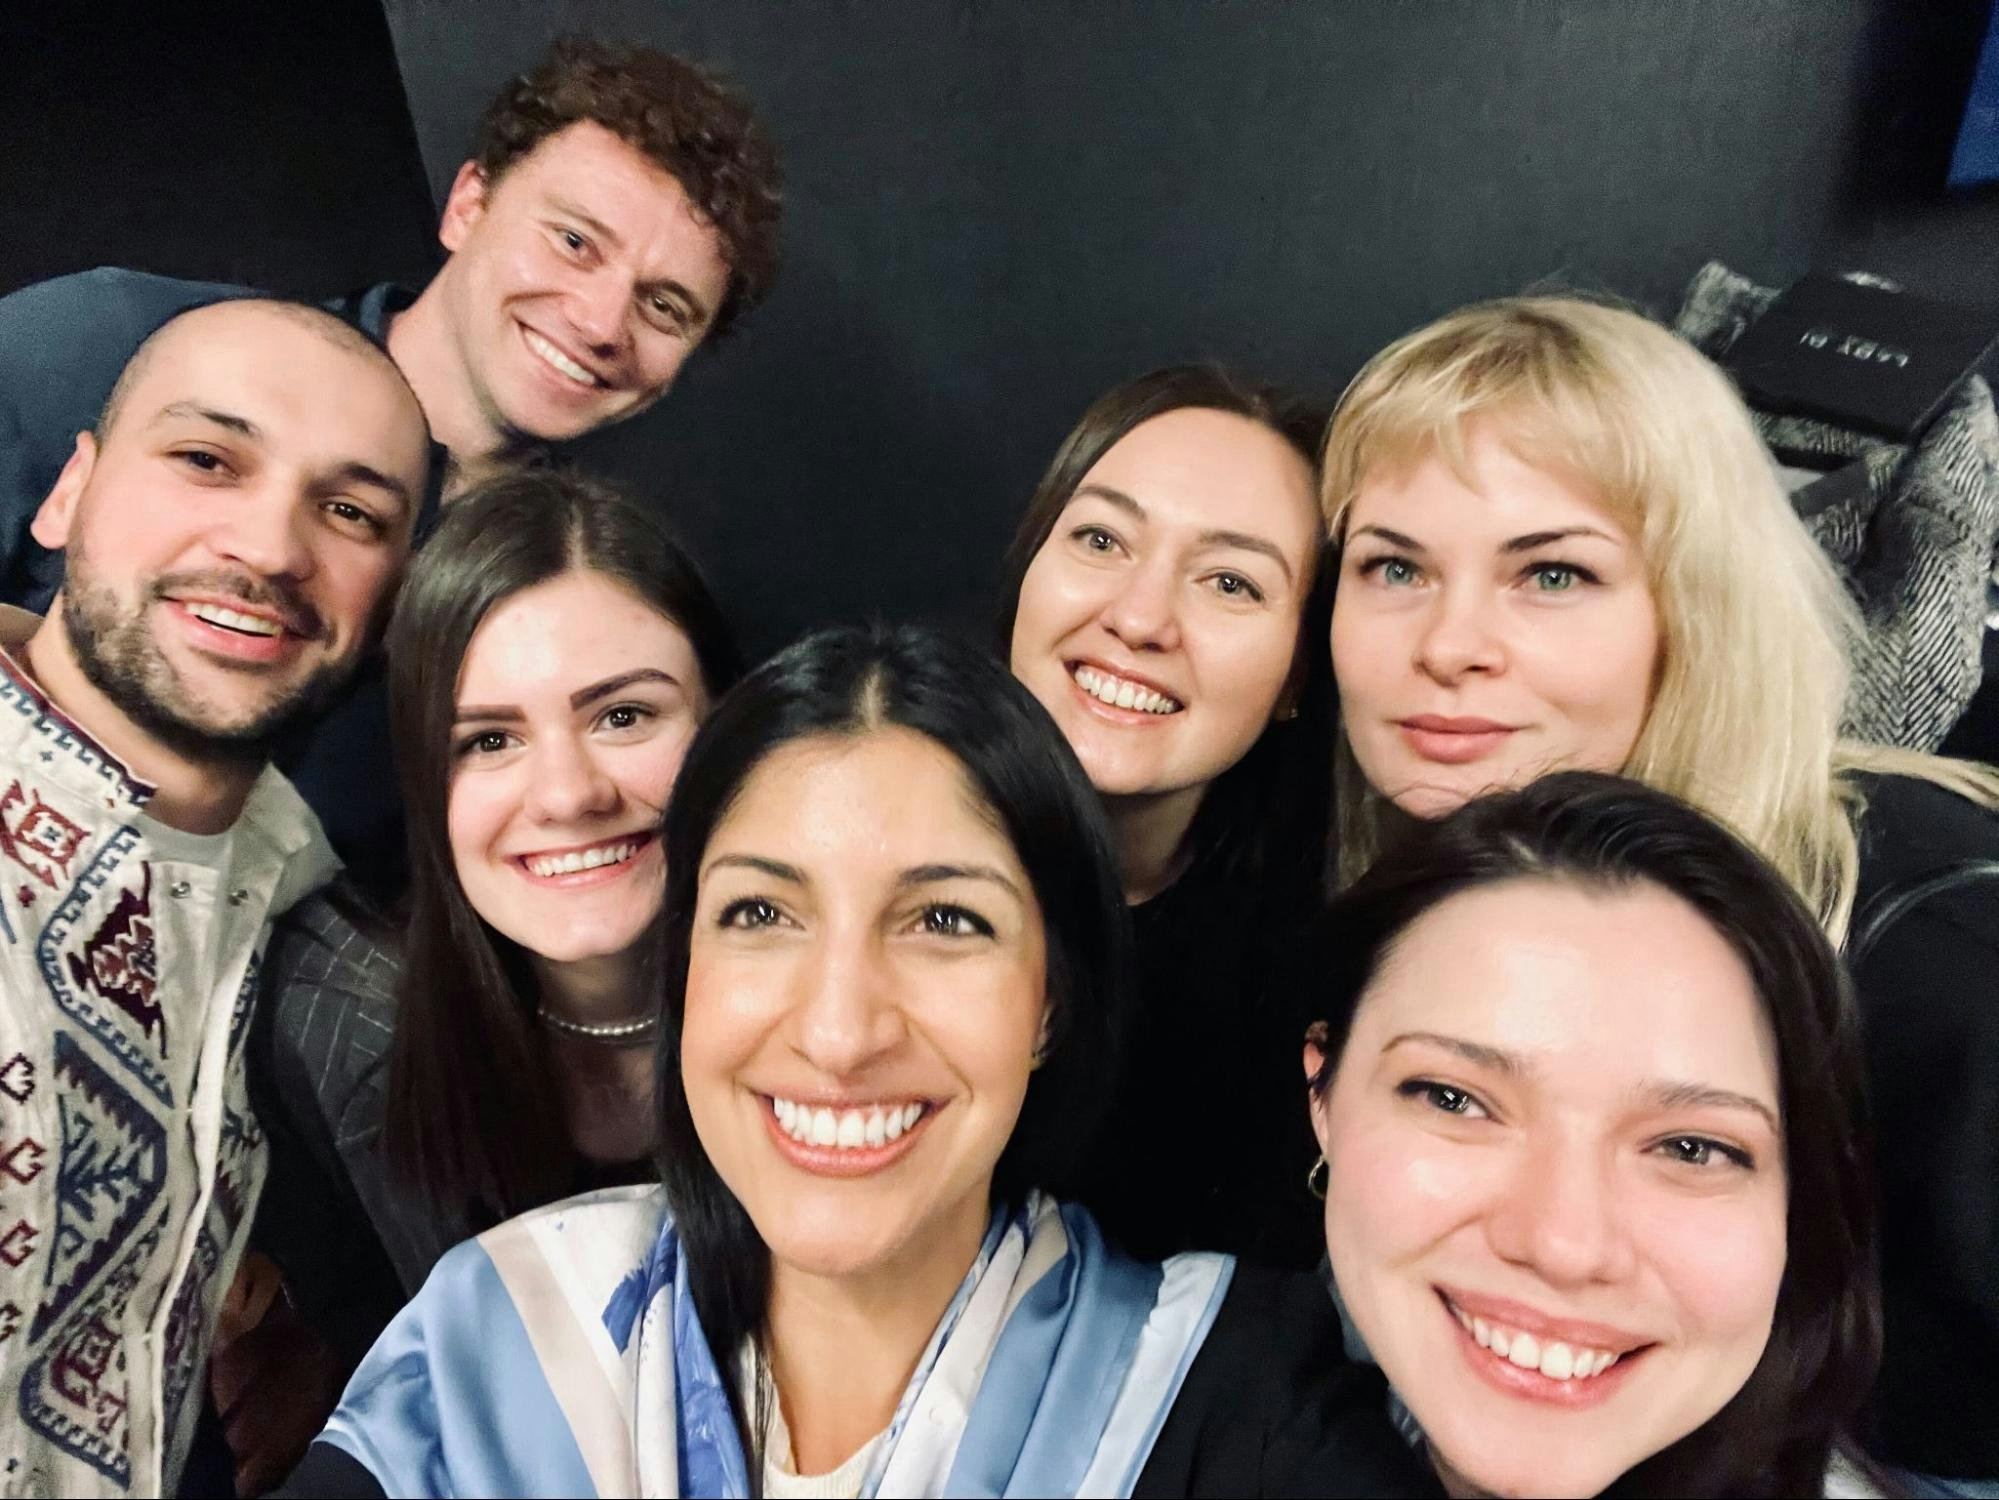 Anjali smiling with the Vimeo team based in Ukraine